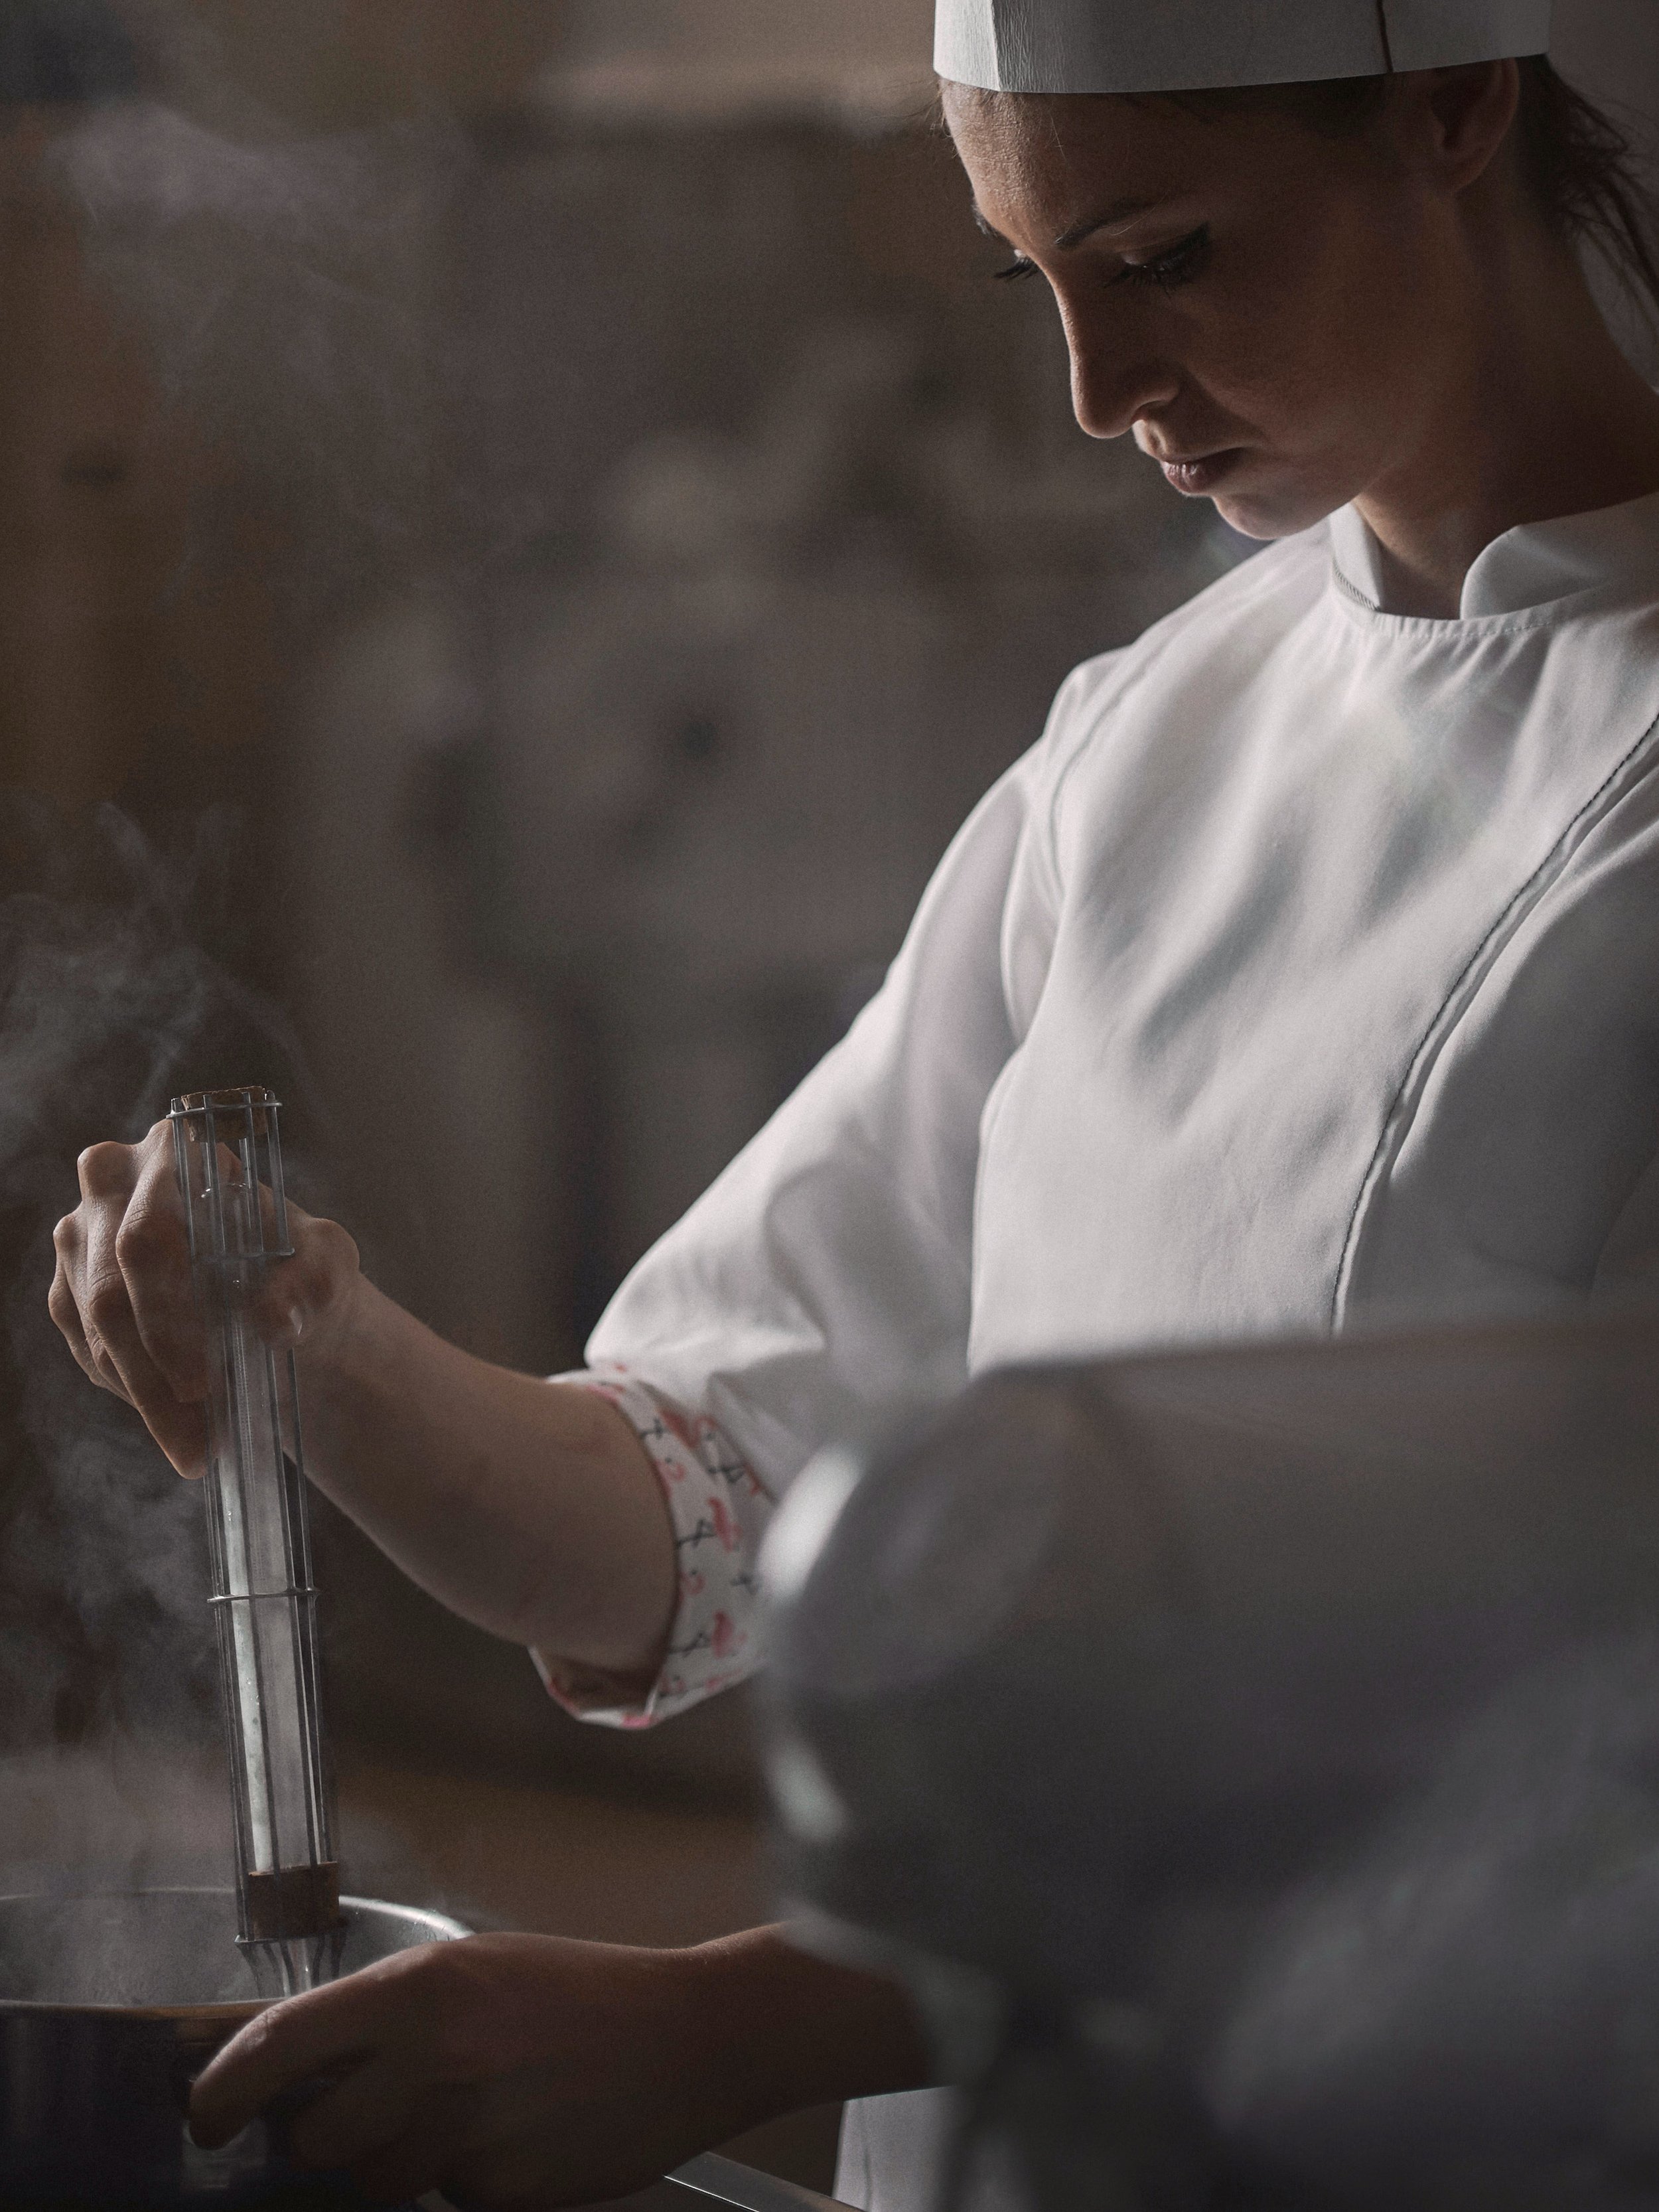 Federica Russo, Pastry Chef